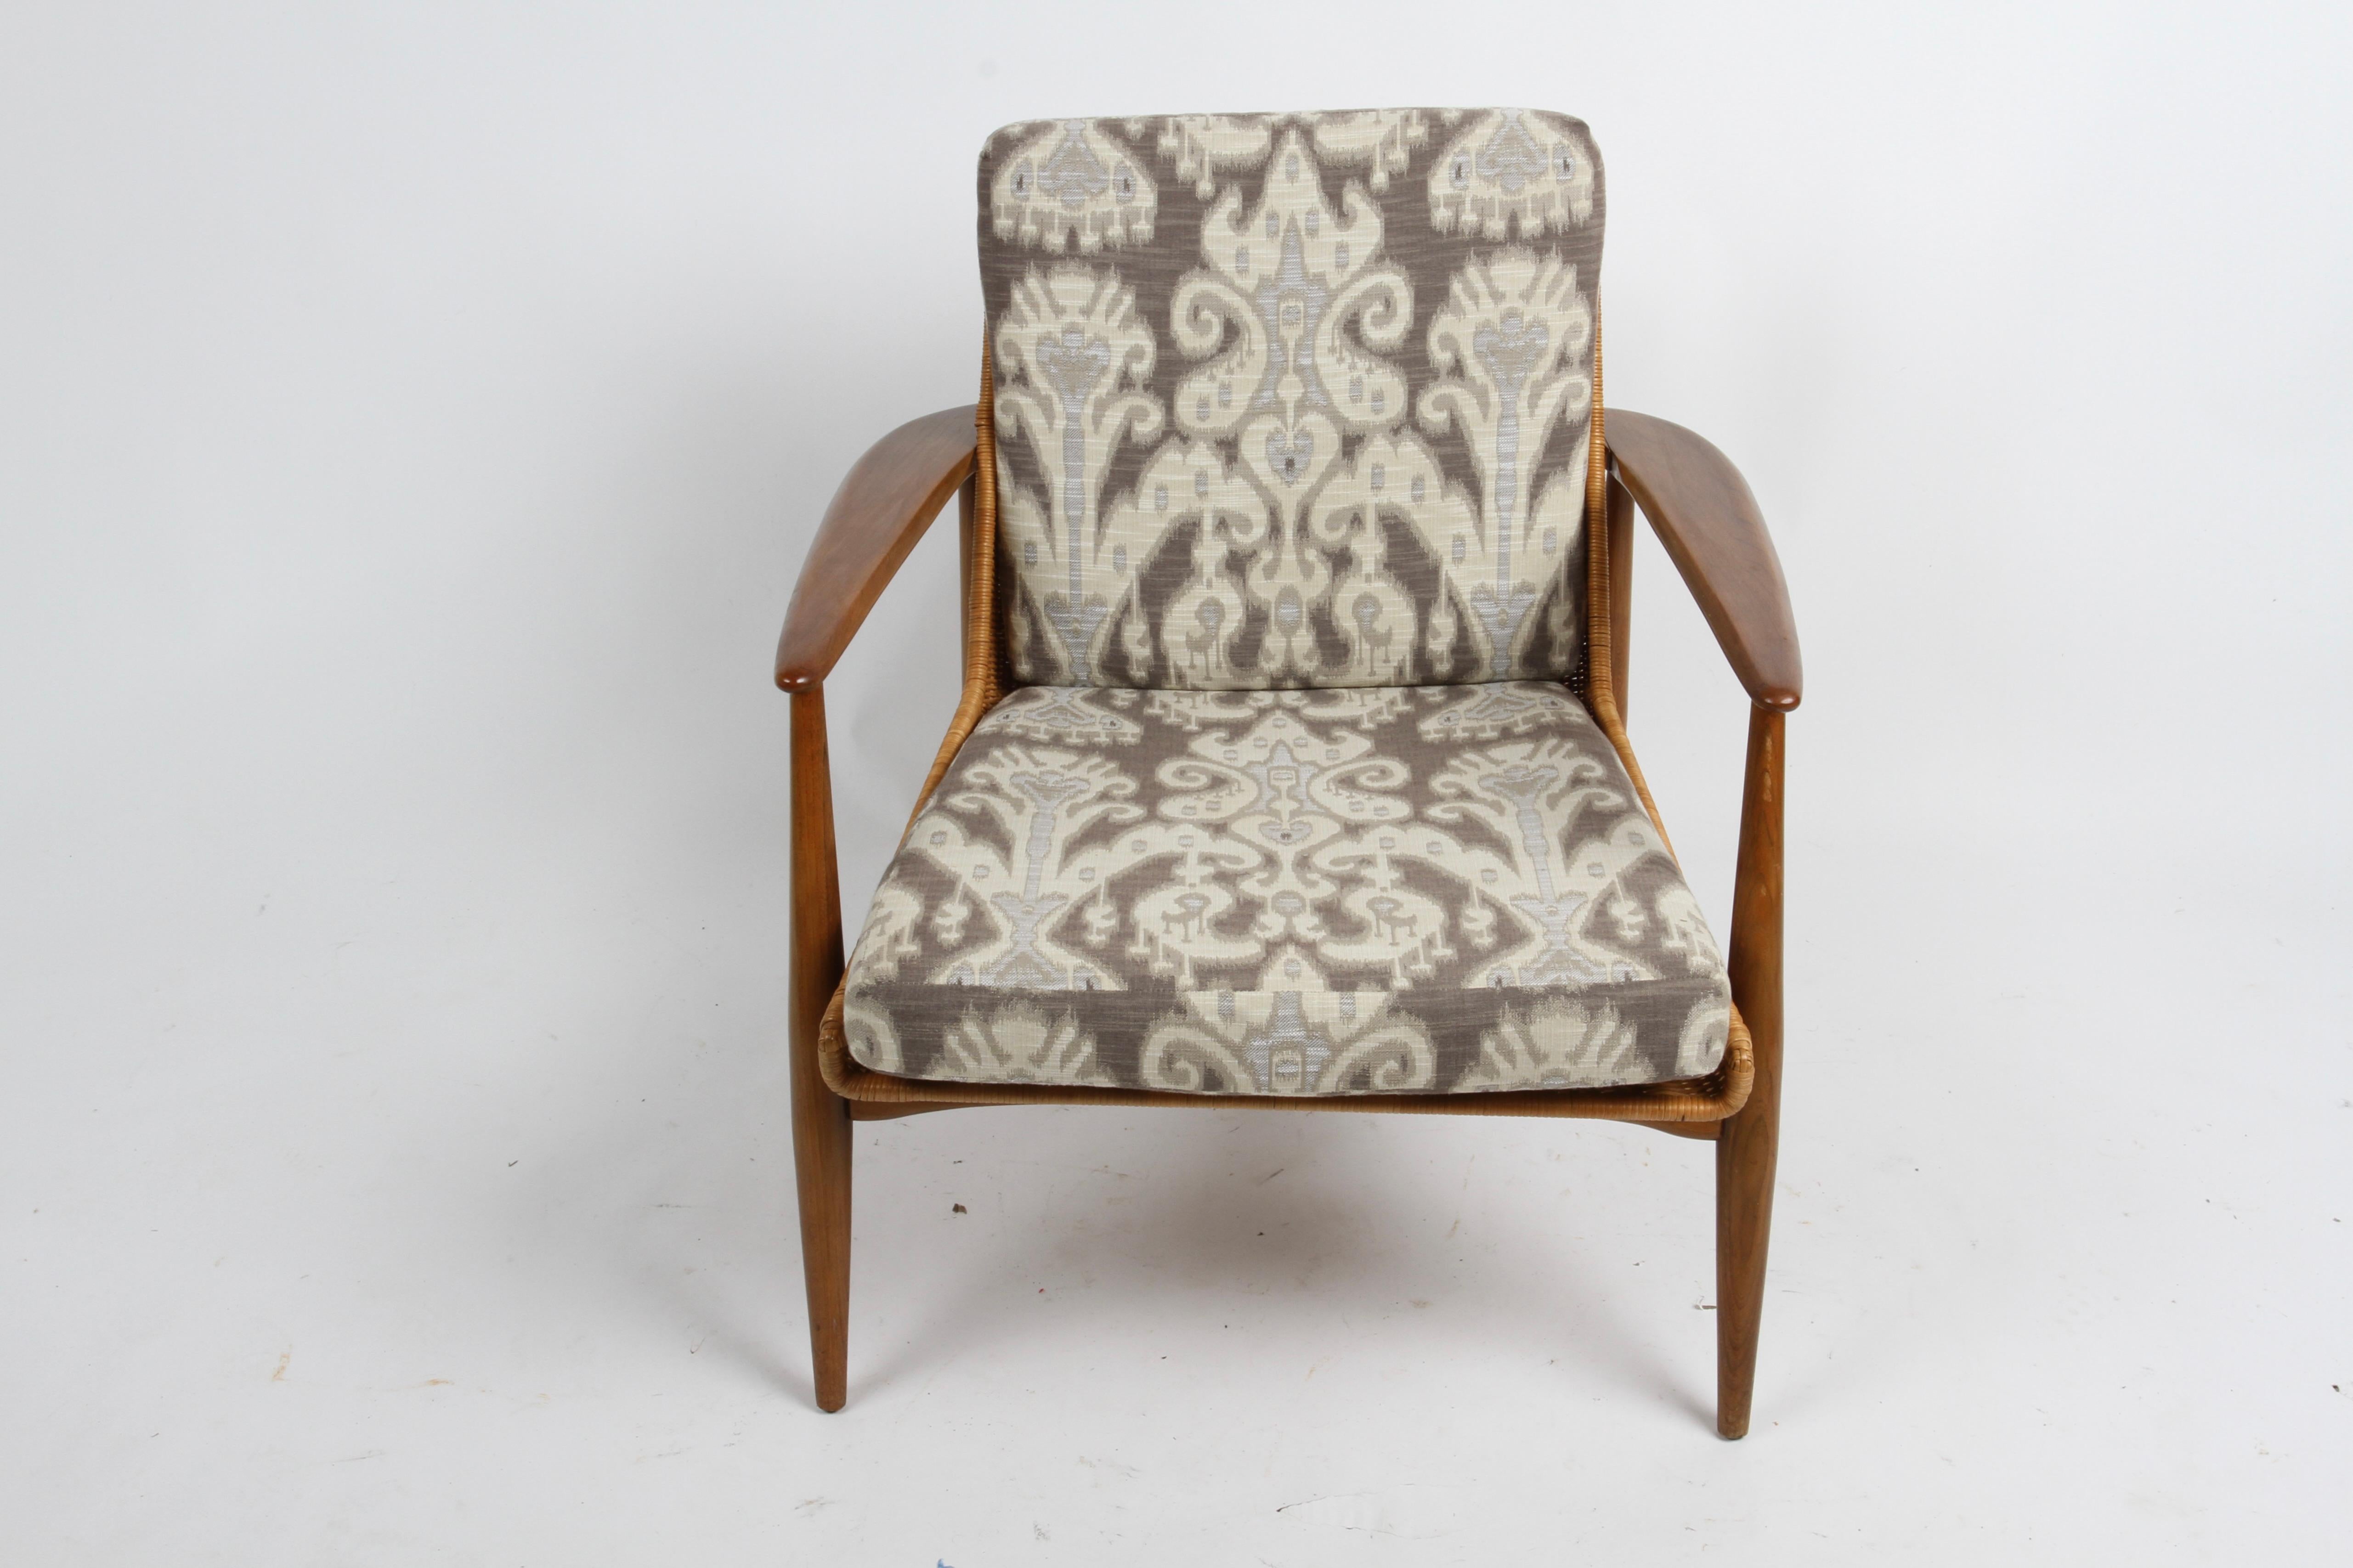 Mid-20th Century Rare Pair of Lawrence Peabody's Sculptural 1806 / 917 Chairs in Walnut & Rattan